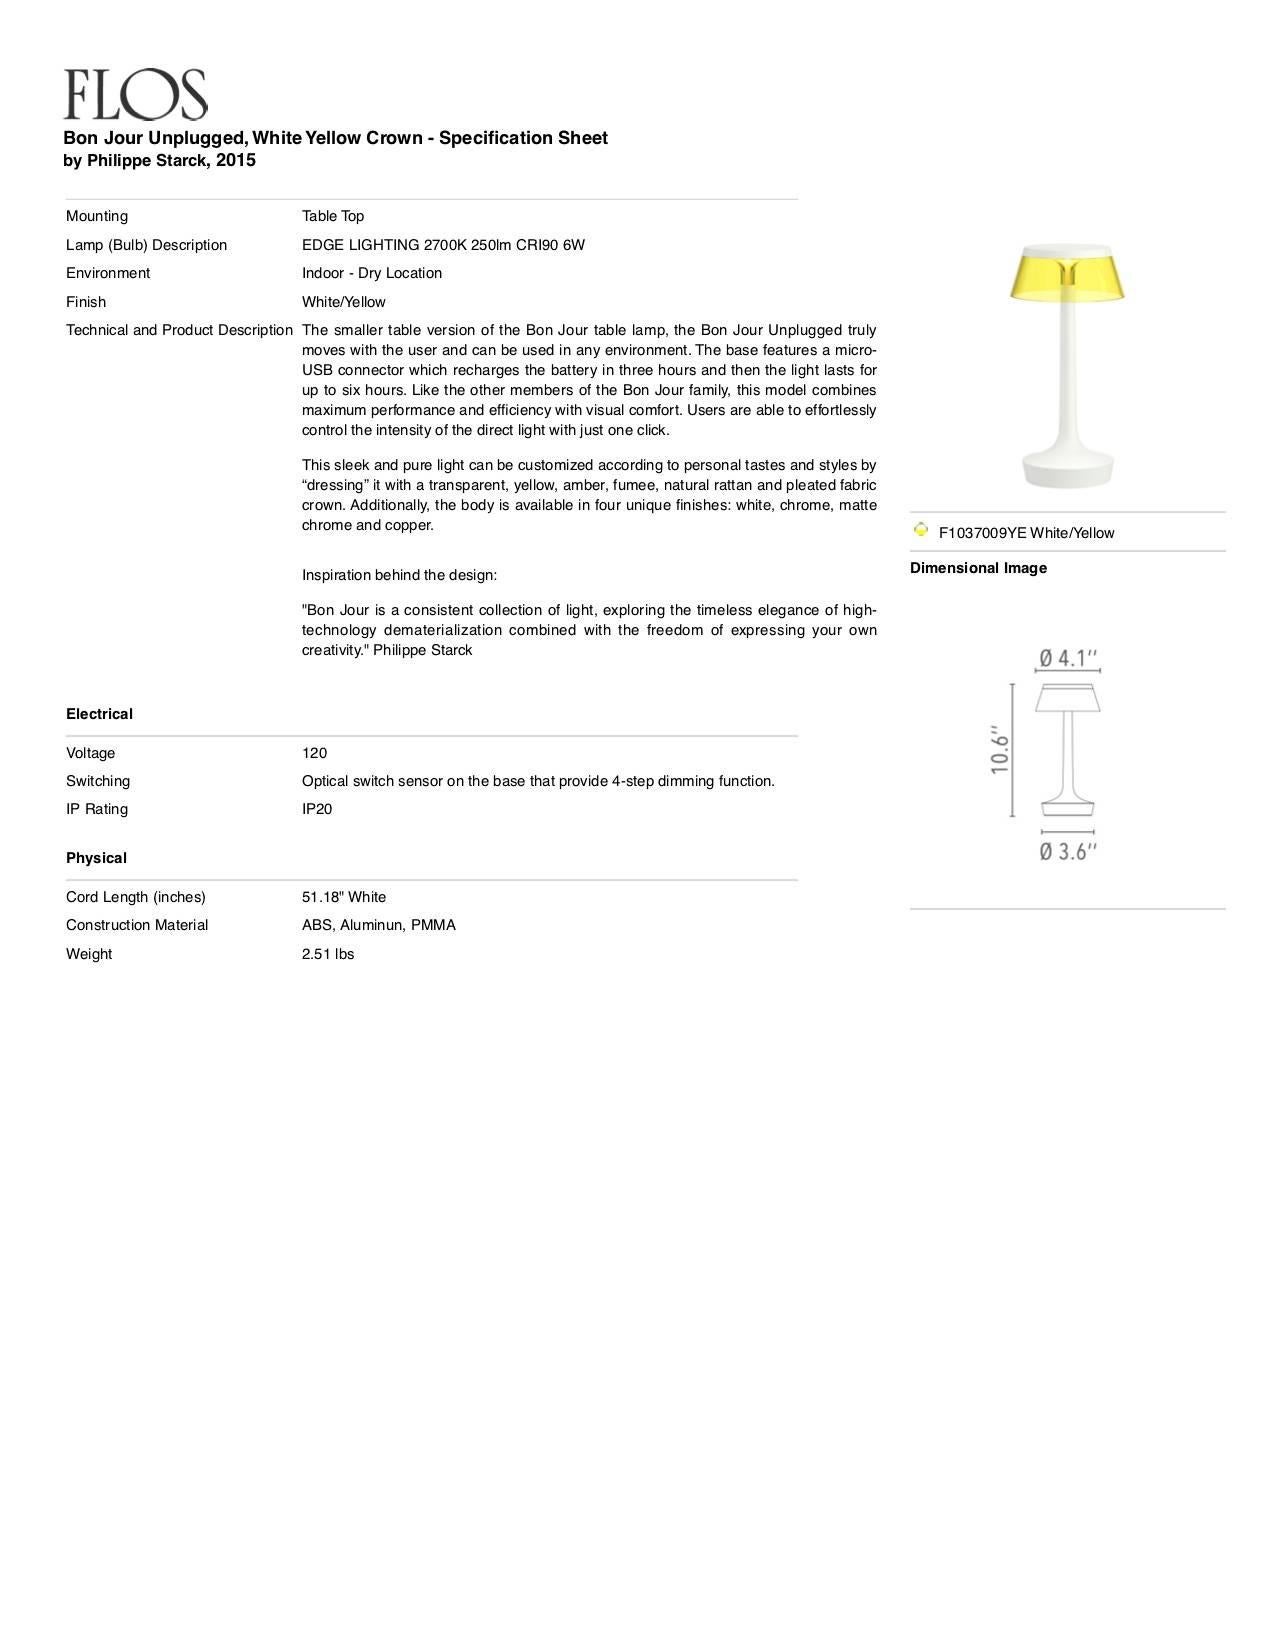 Italian FLOS Bon Jour Unplugged White Lamp with Yellow Crown by Philippe Starck For Sale